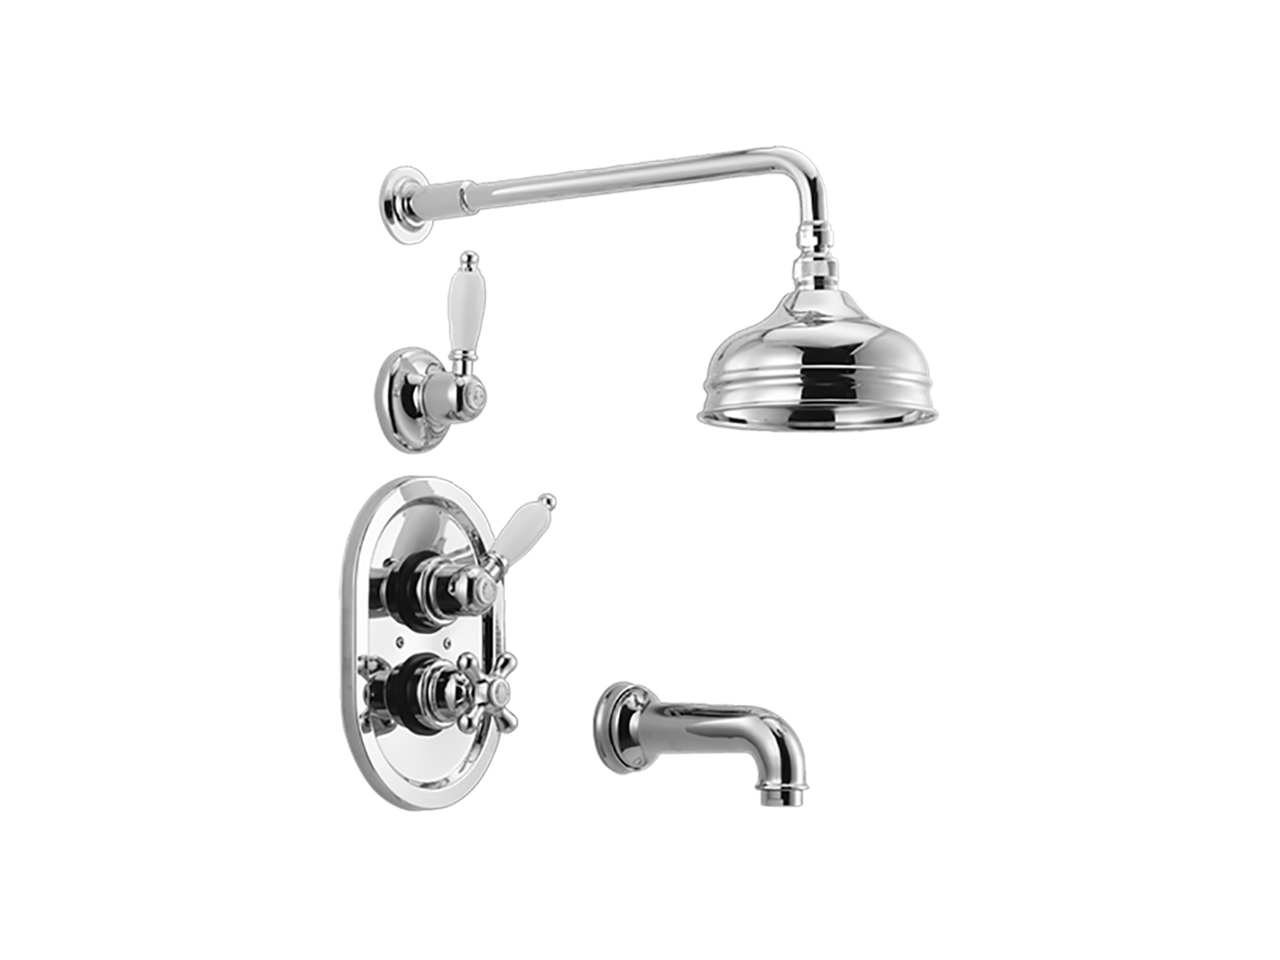 Concealed thermostatic bath mixer CROISETTE - v1